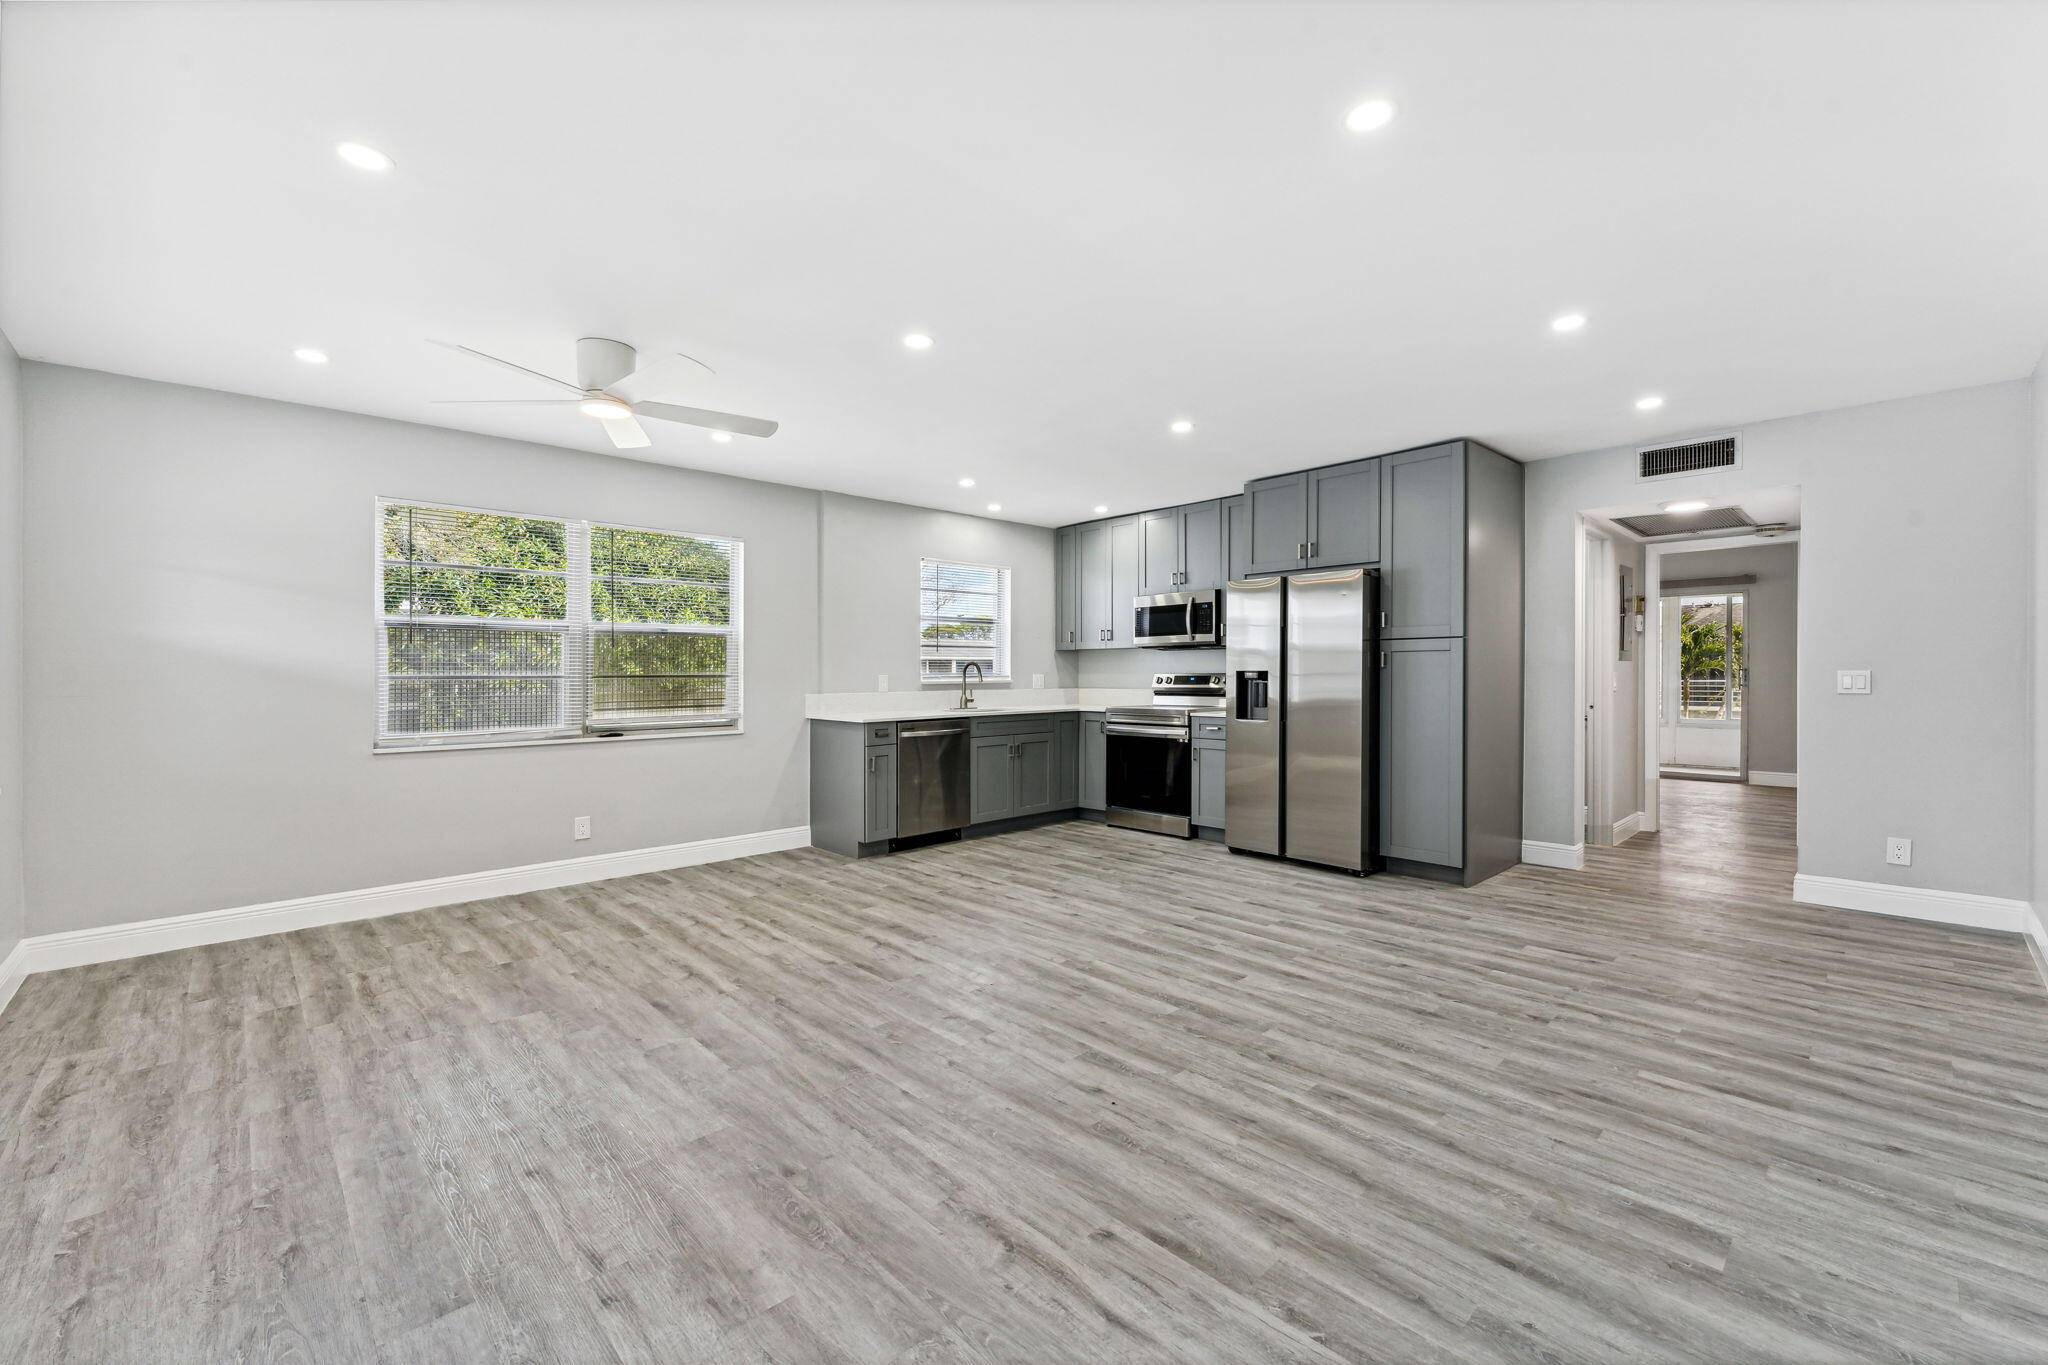 MOTIVATED SELLER Gut renovated 1 bedroom, 1 and a half bathroom condo has been renovated modernly for buyers with the most refined taste imaginable.